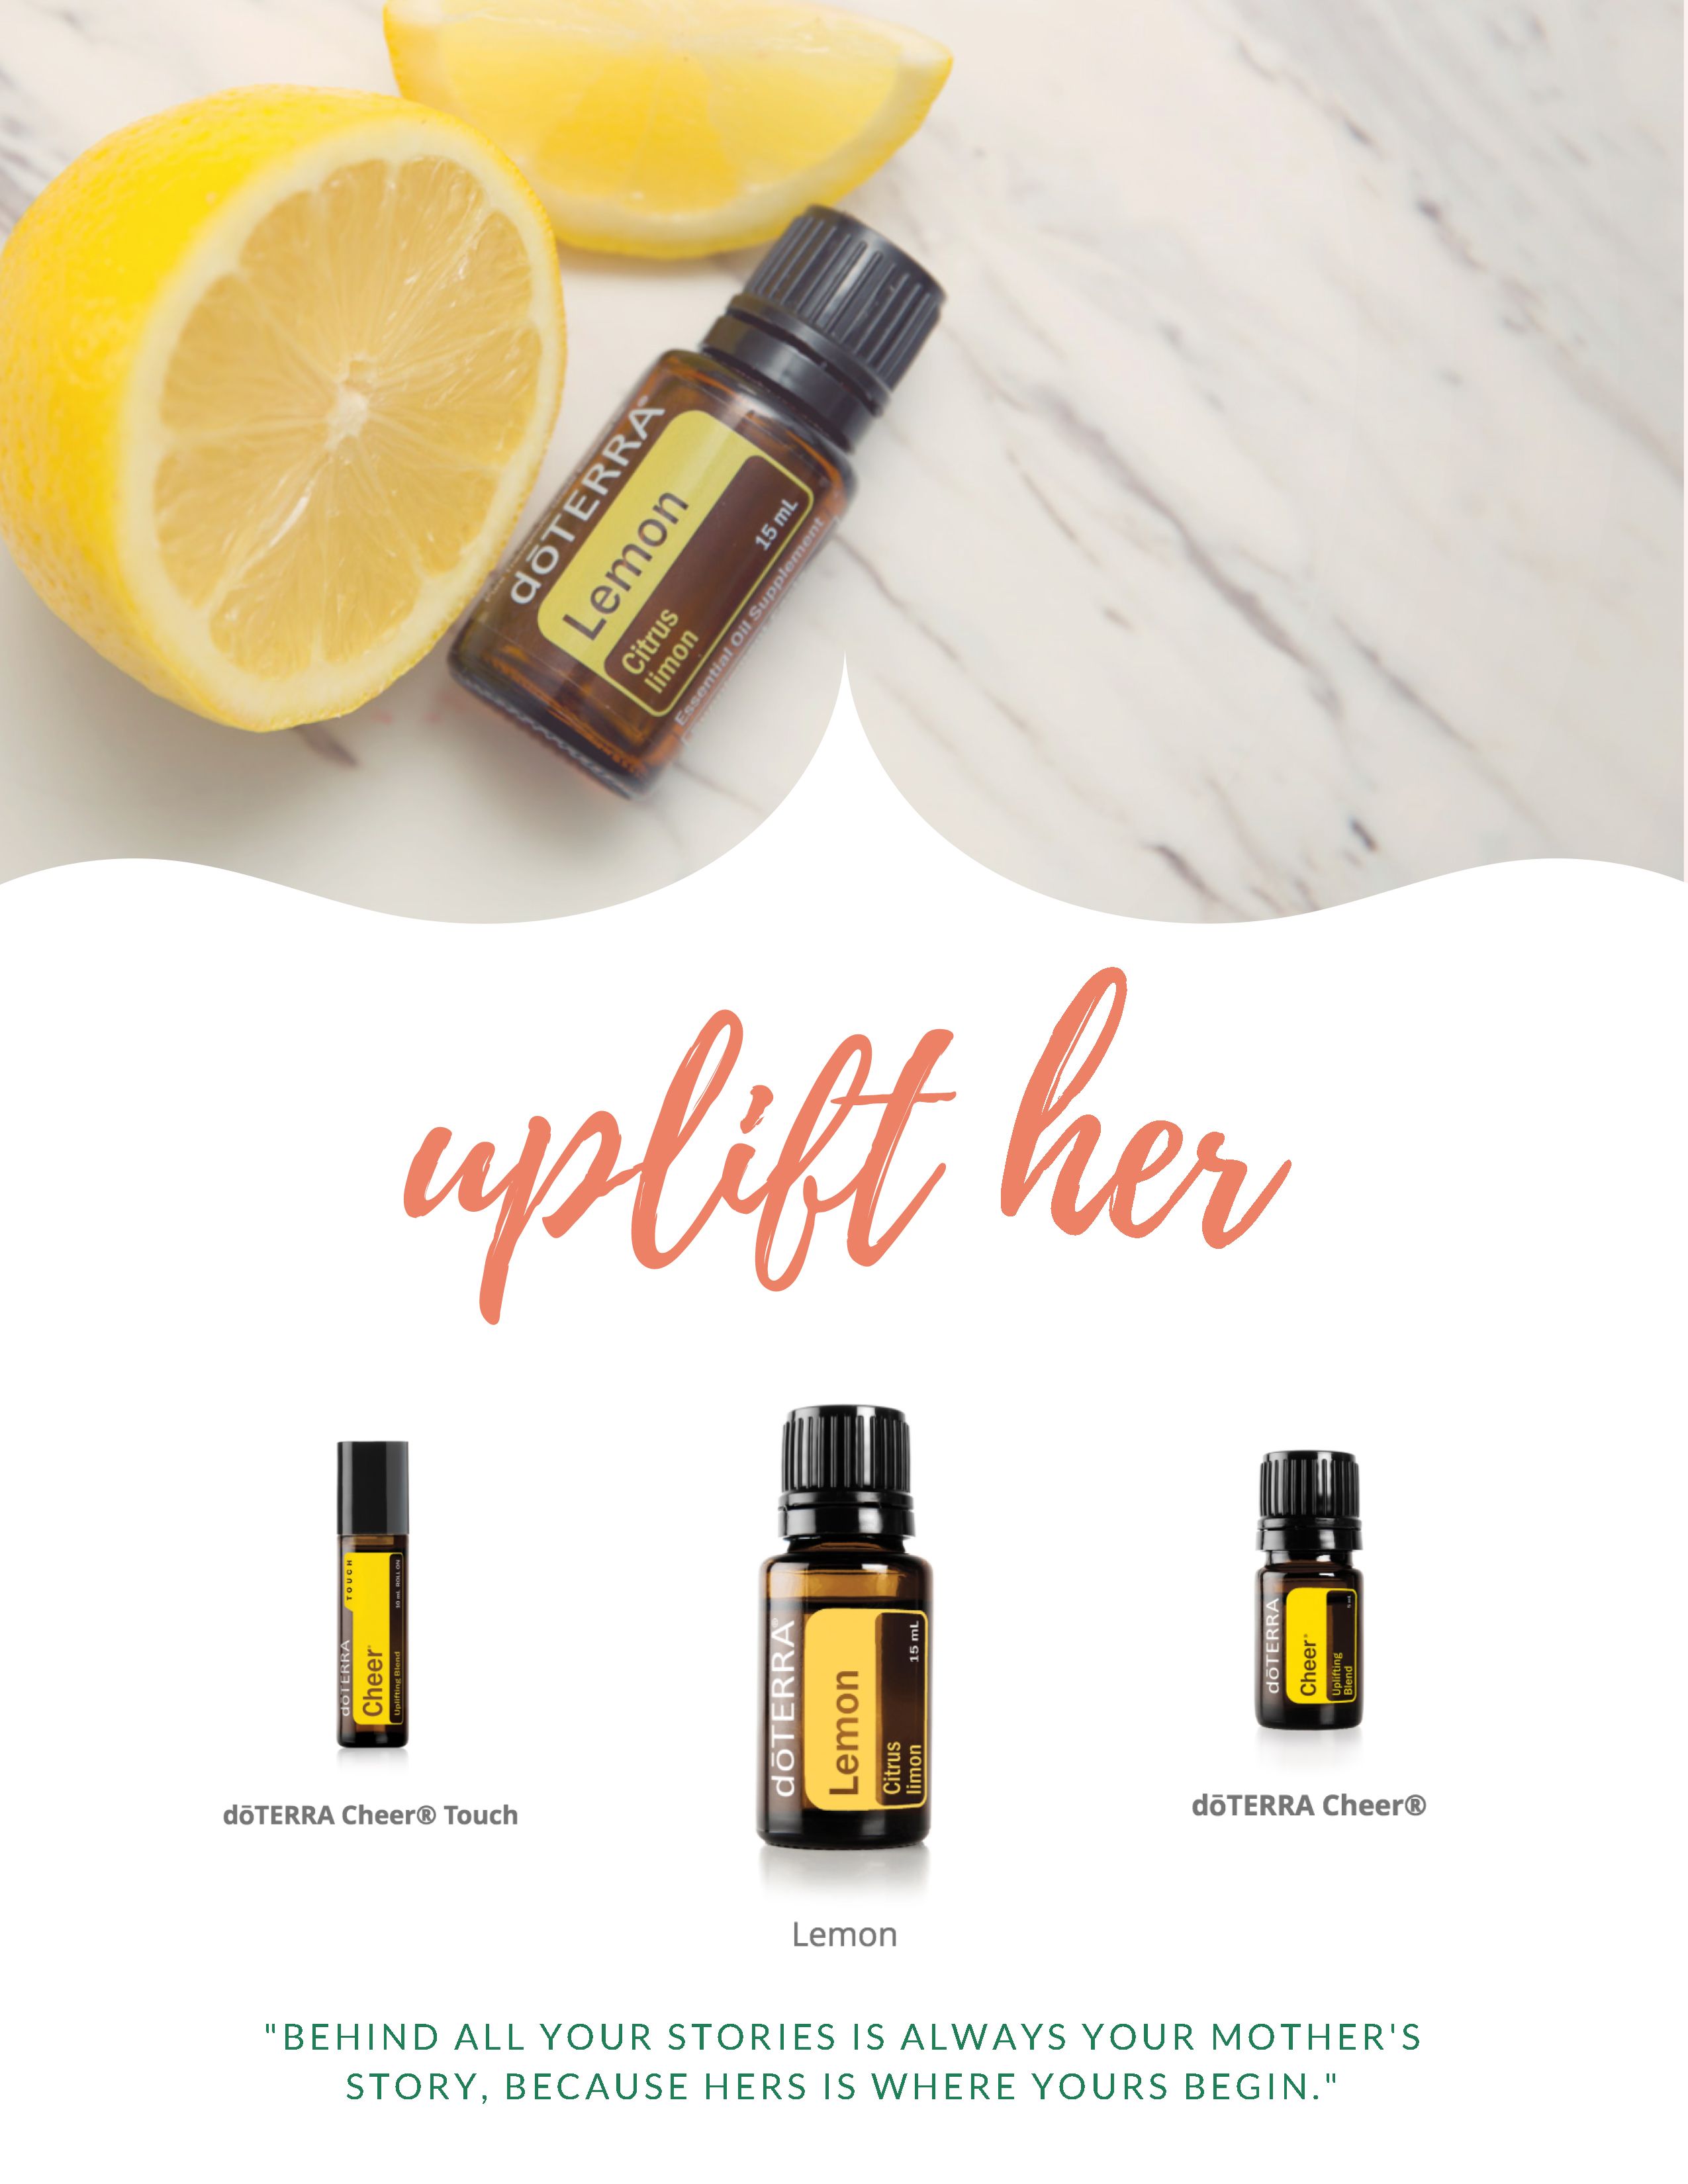 Uplift your mom with the refreshing fragrance of lemon